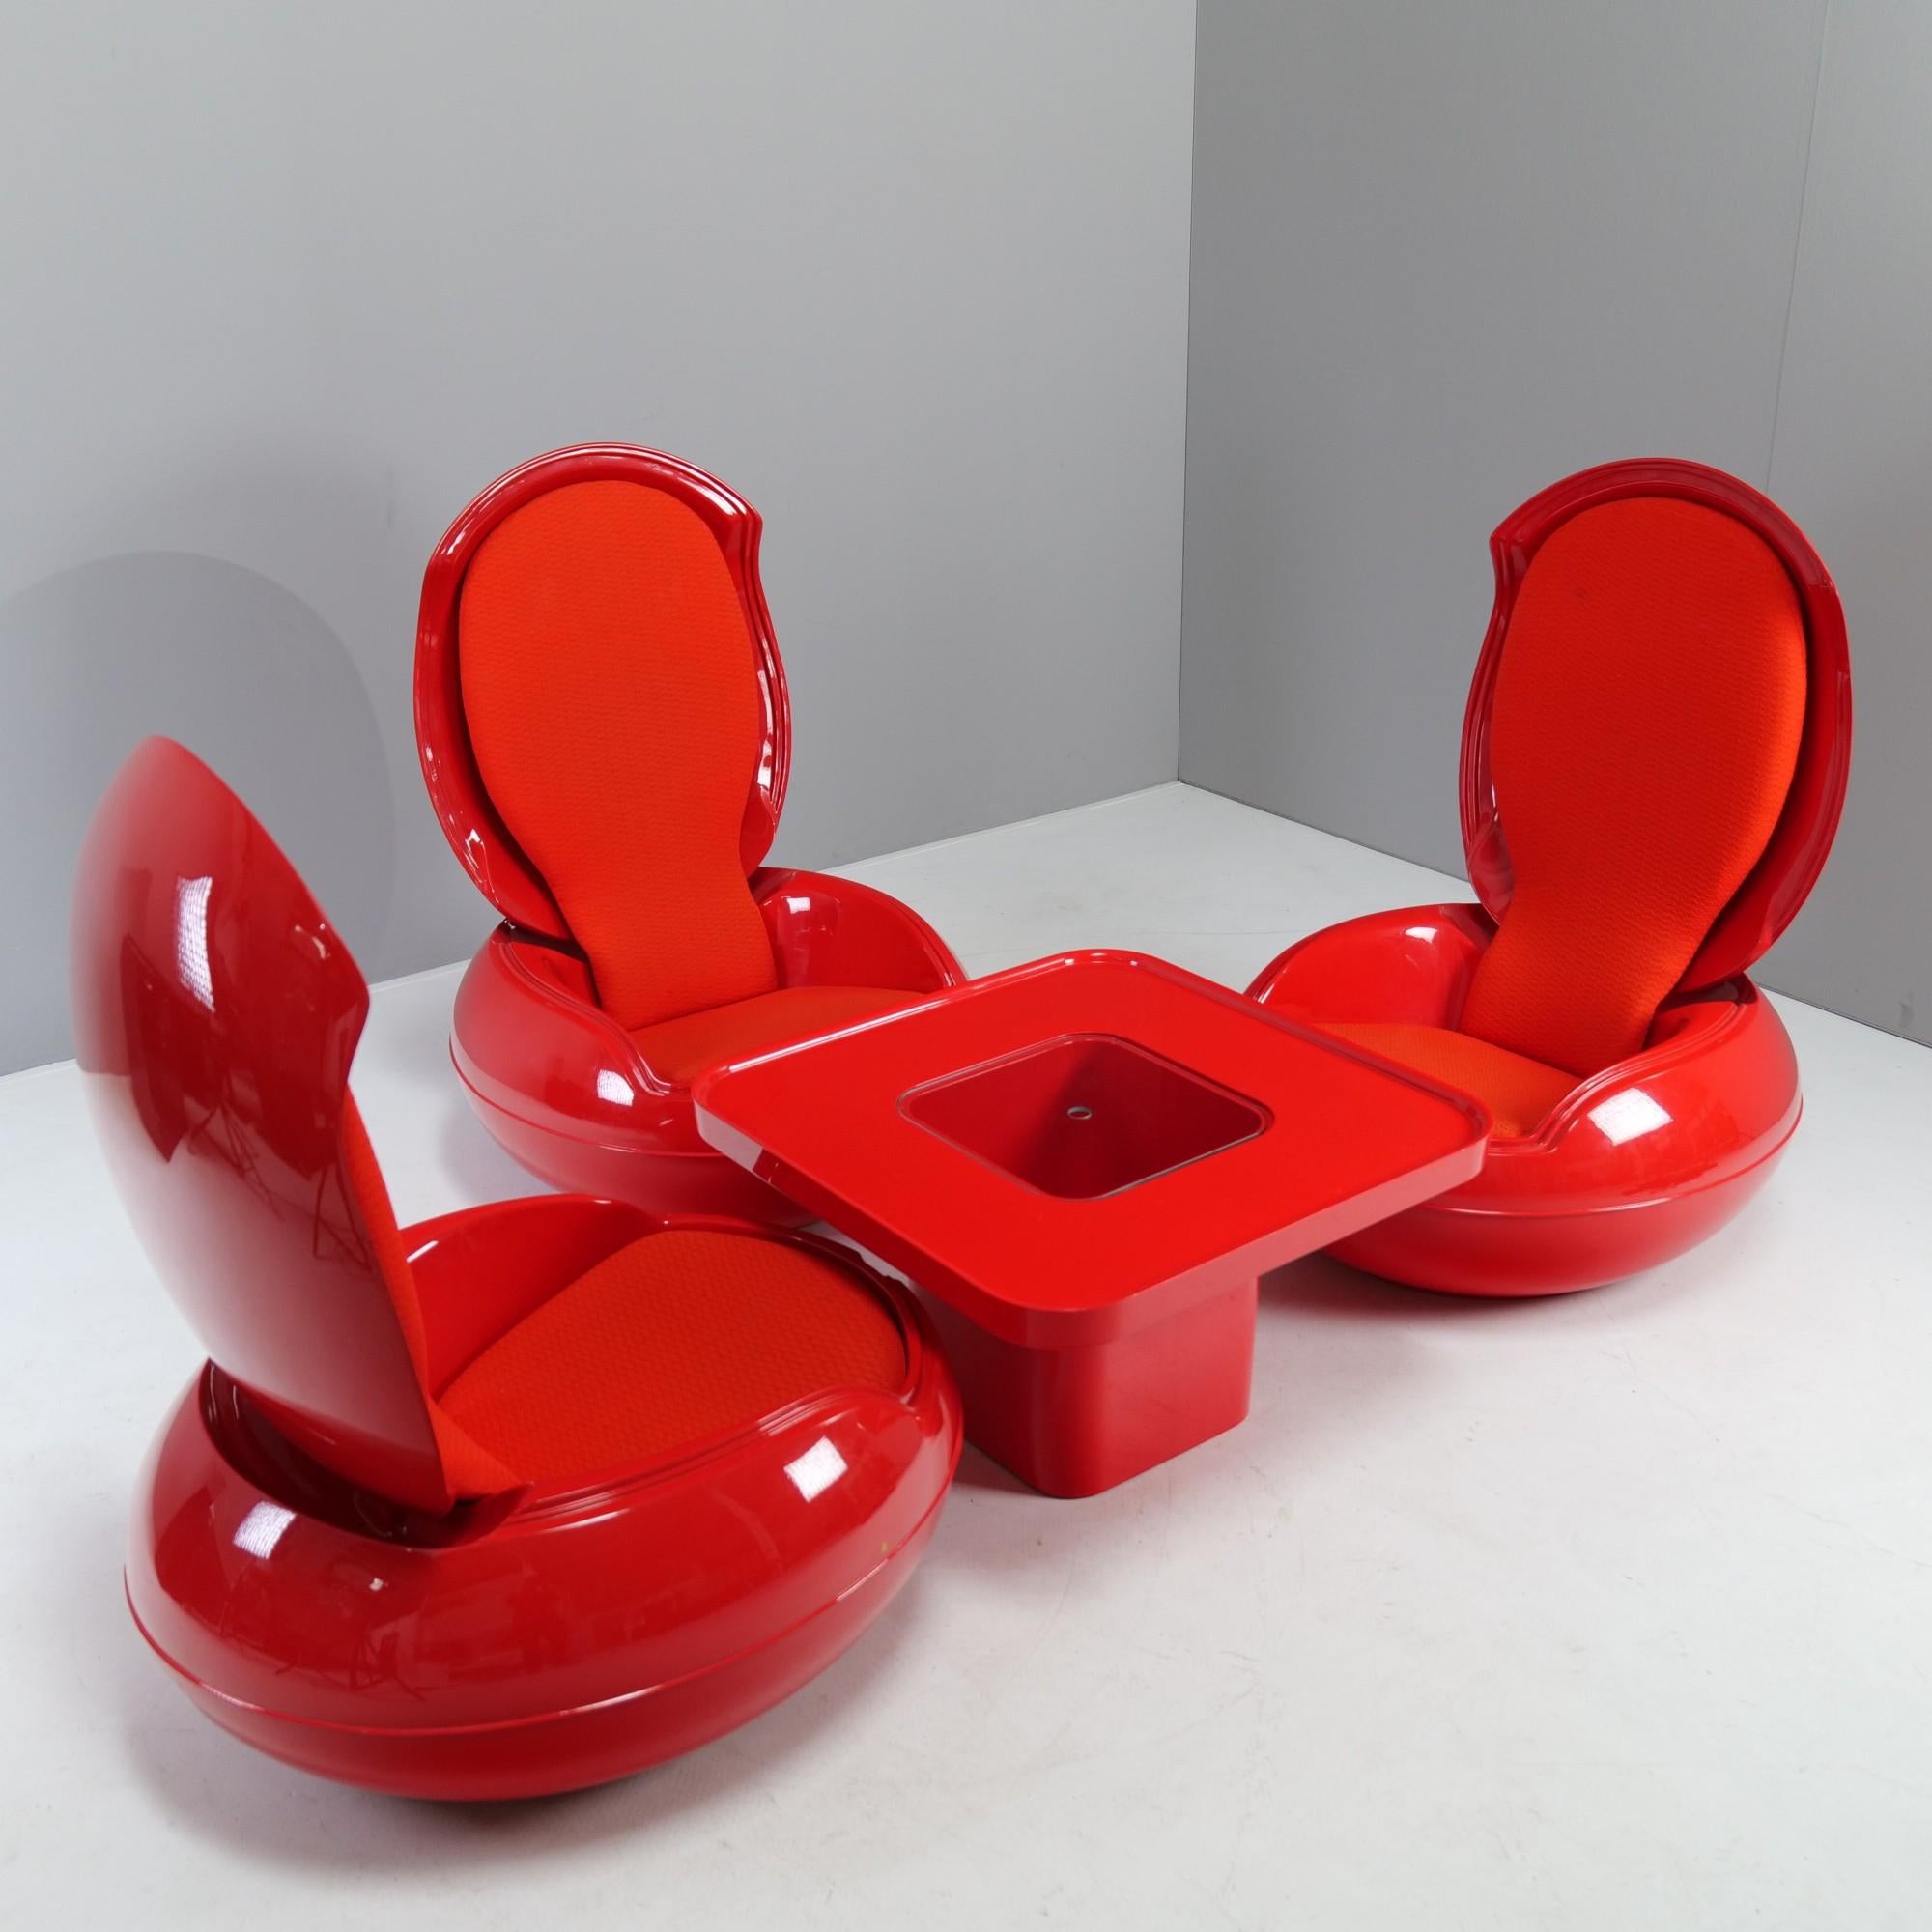 Rare space senftenberger age egg chairs by Peter Ghyczy.

The best condition i have ever seen. Only a few slight signs of use.

Made in Germany - 1968 by Peter Ghyczy for Reuter Products.

 Set of 3 eggs and one table.

Dimensions egg:
103